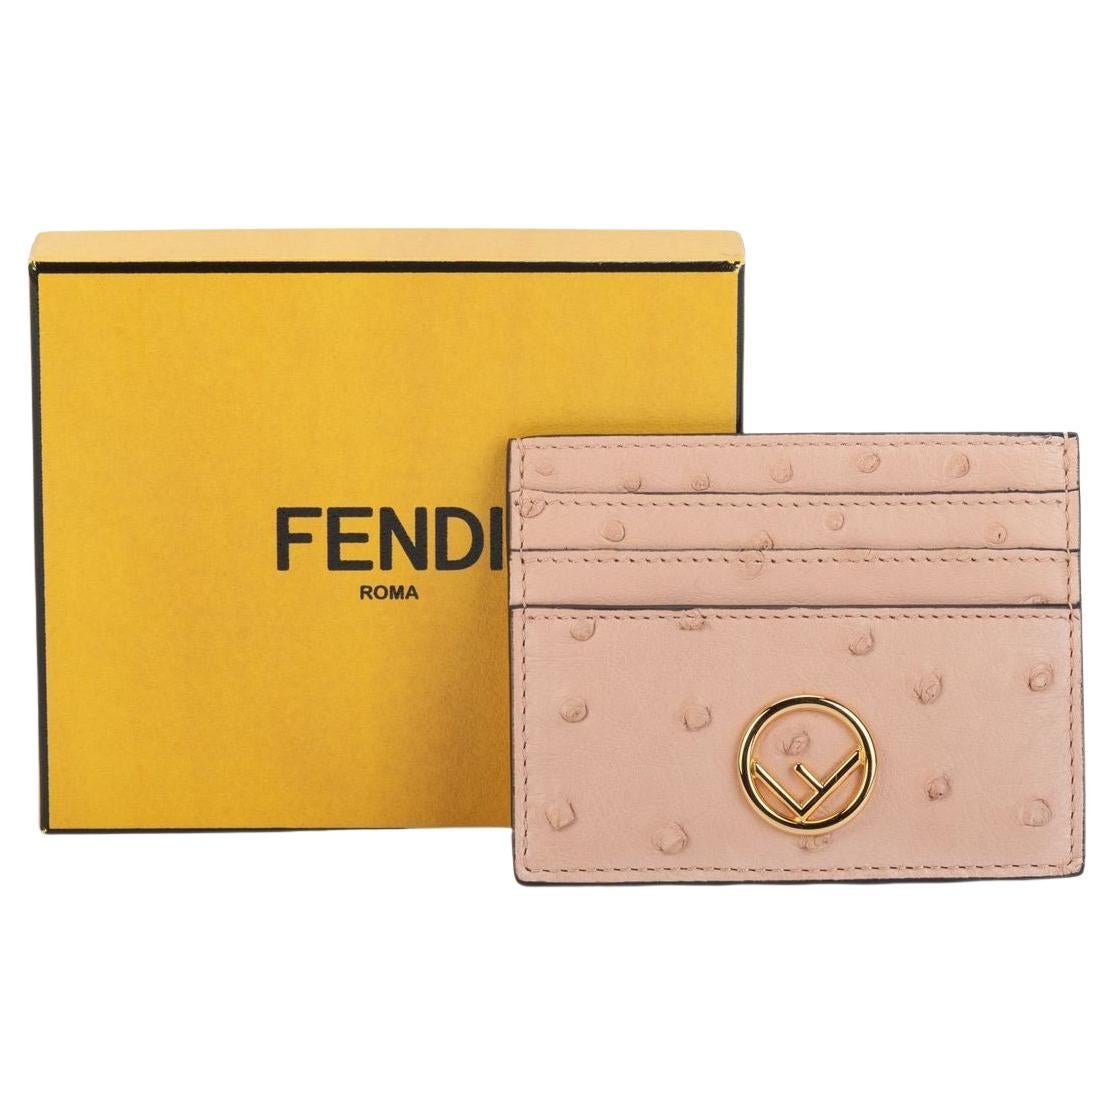 New-Rare Virgil Abloh FW 2022-Multiple Wallet in Blue/Pink Crocodile  leather For Sale at 1stDibs